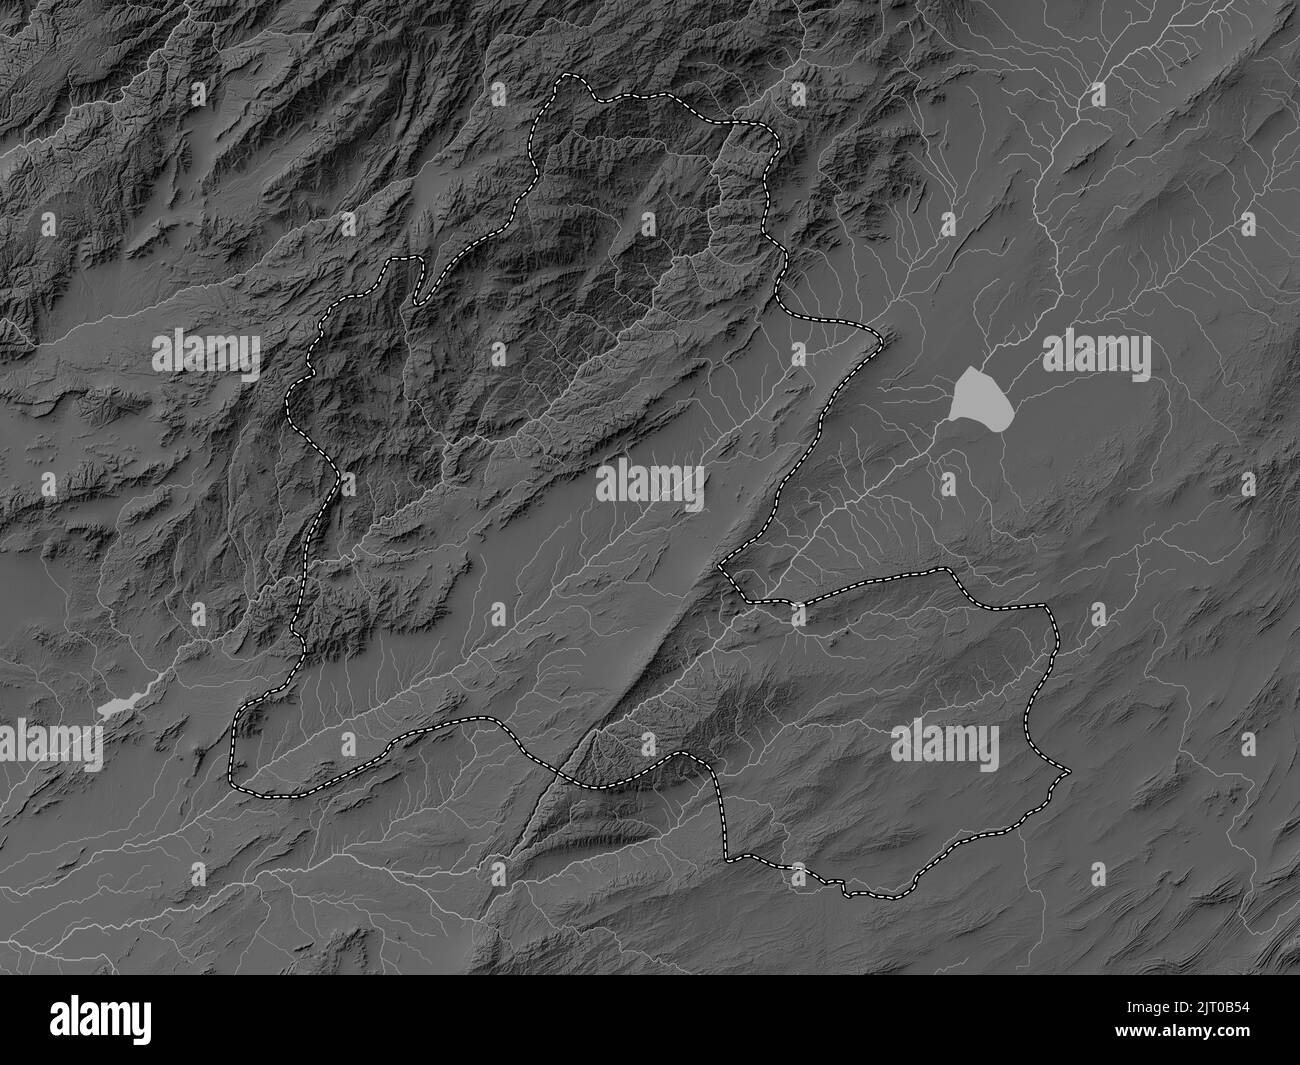 Zabul, province of Afghanistan. Grayscale elevation map with lakes and rivers Stock Photo